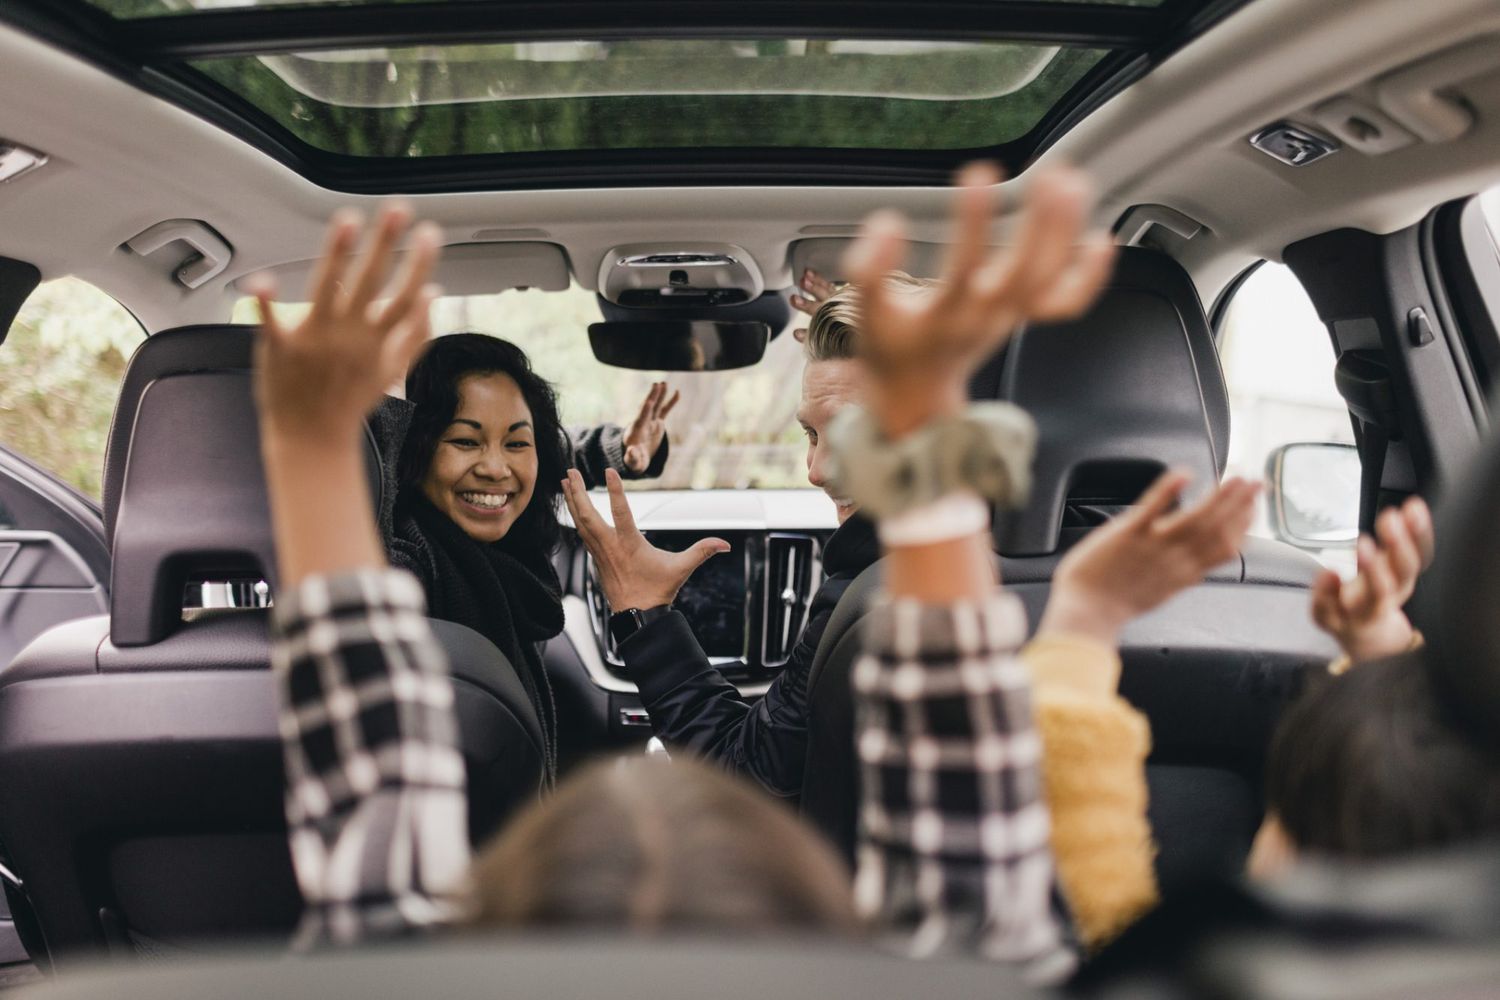 An image of a family raising their hands while on a road trip.